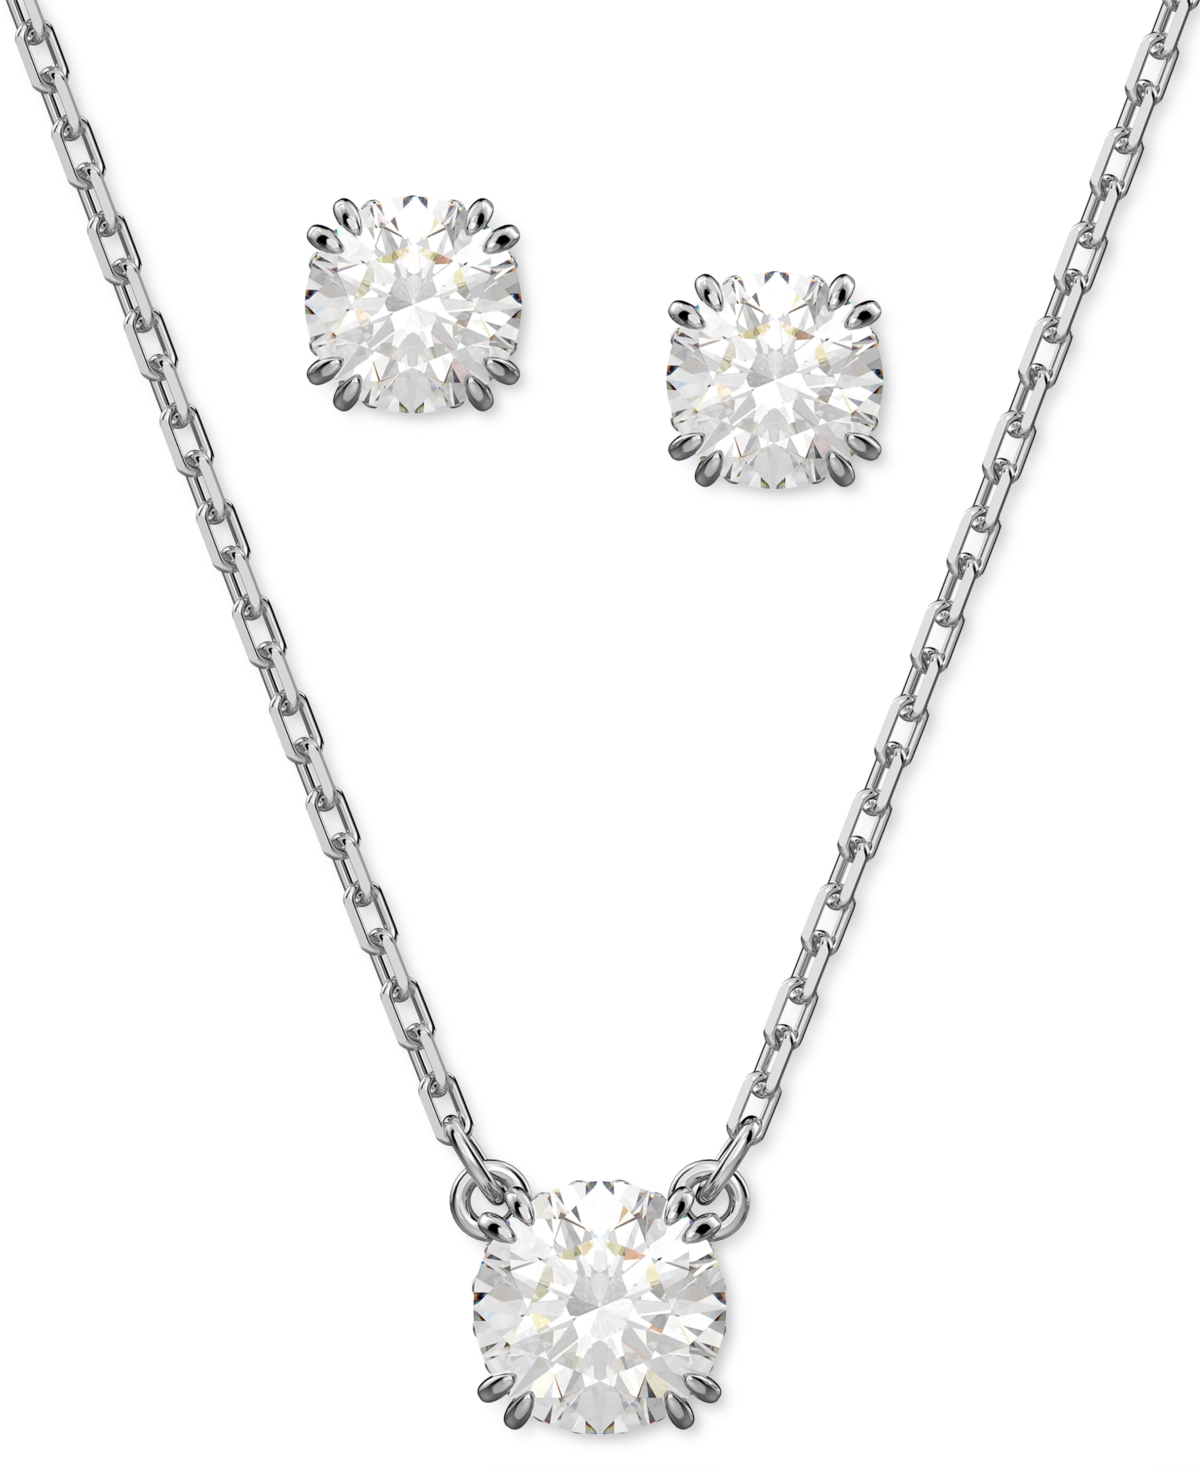 Swarovski Silver-tone 2-pc. Set Crystal Earrings And Necklace, 14-7/8" + 2" Extender